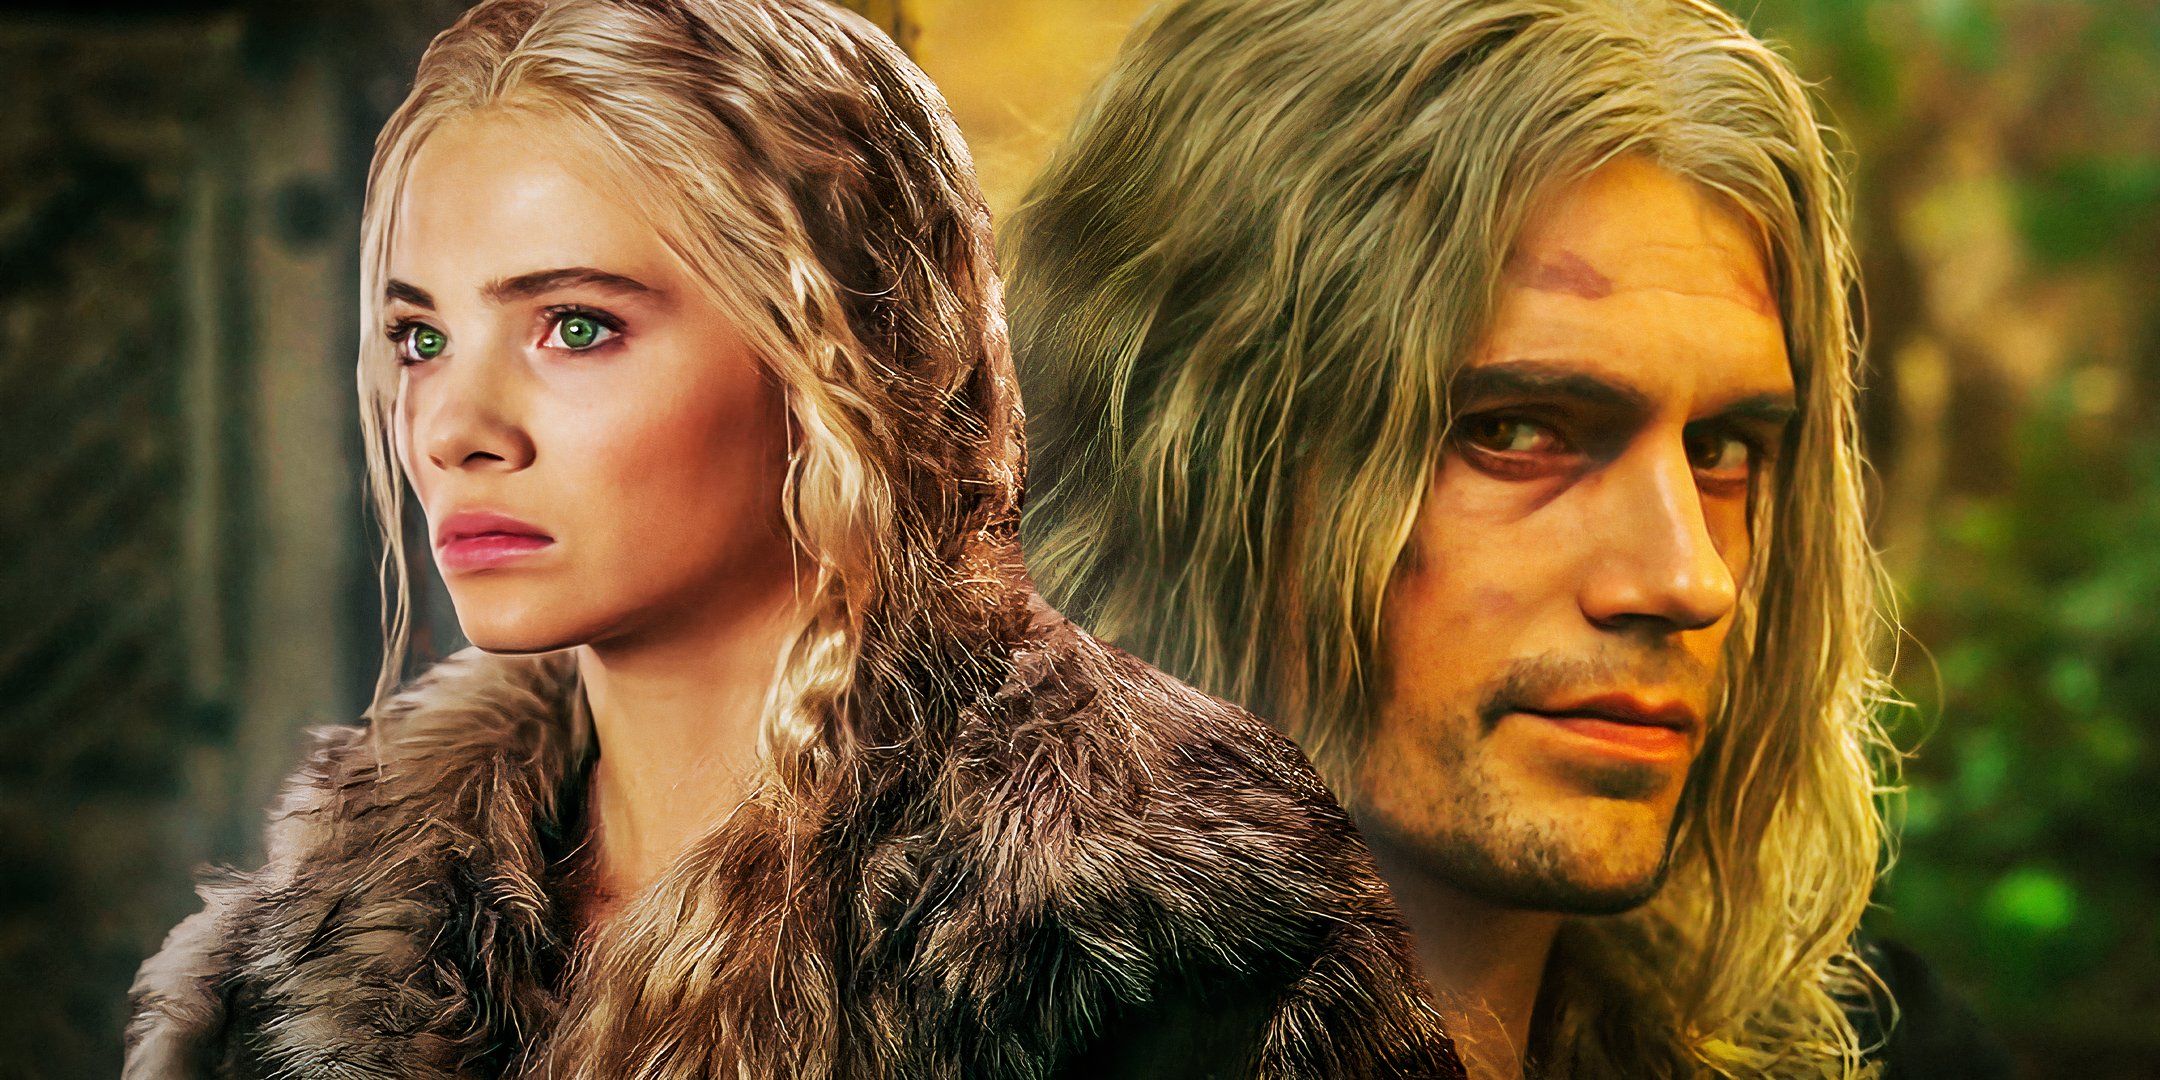 The Witcher Ciri and Henry Cavill's Geralt